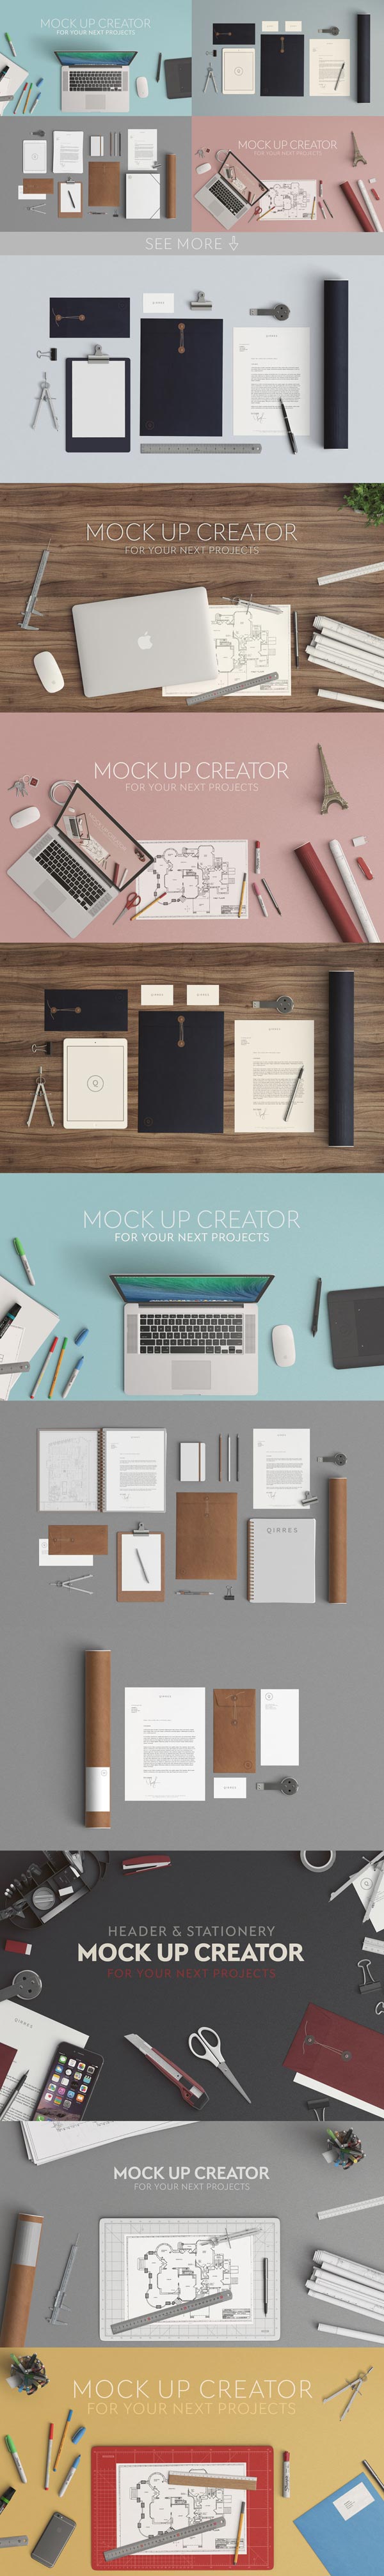 The perfect mock up creator for your next design and identity projects.